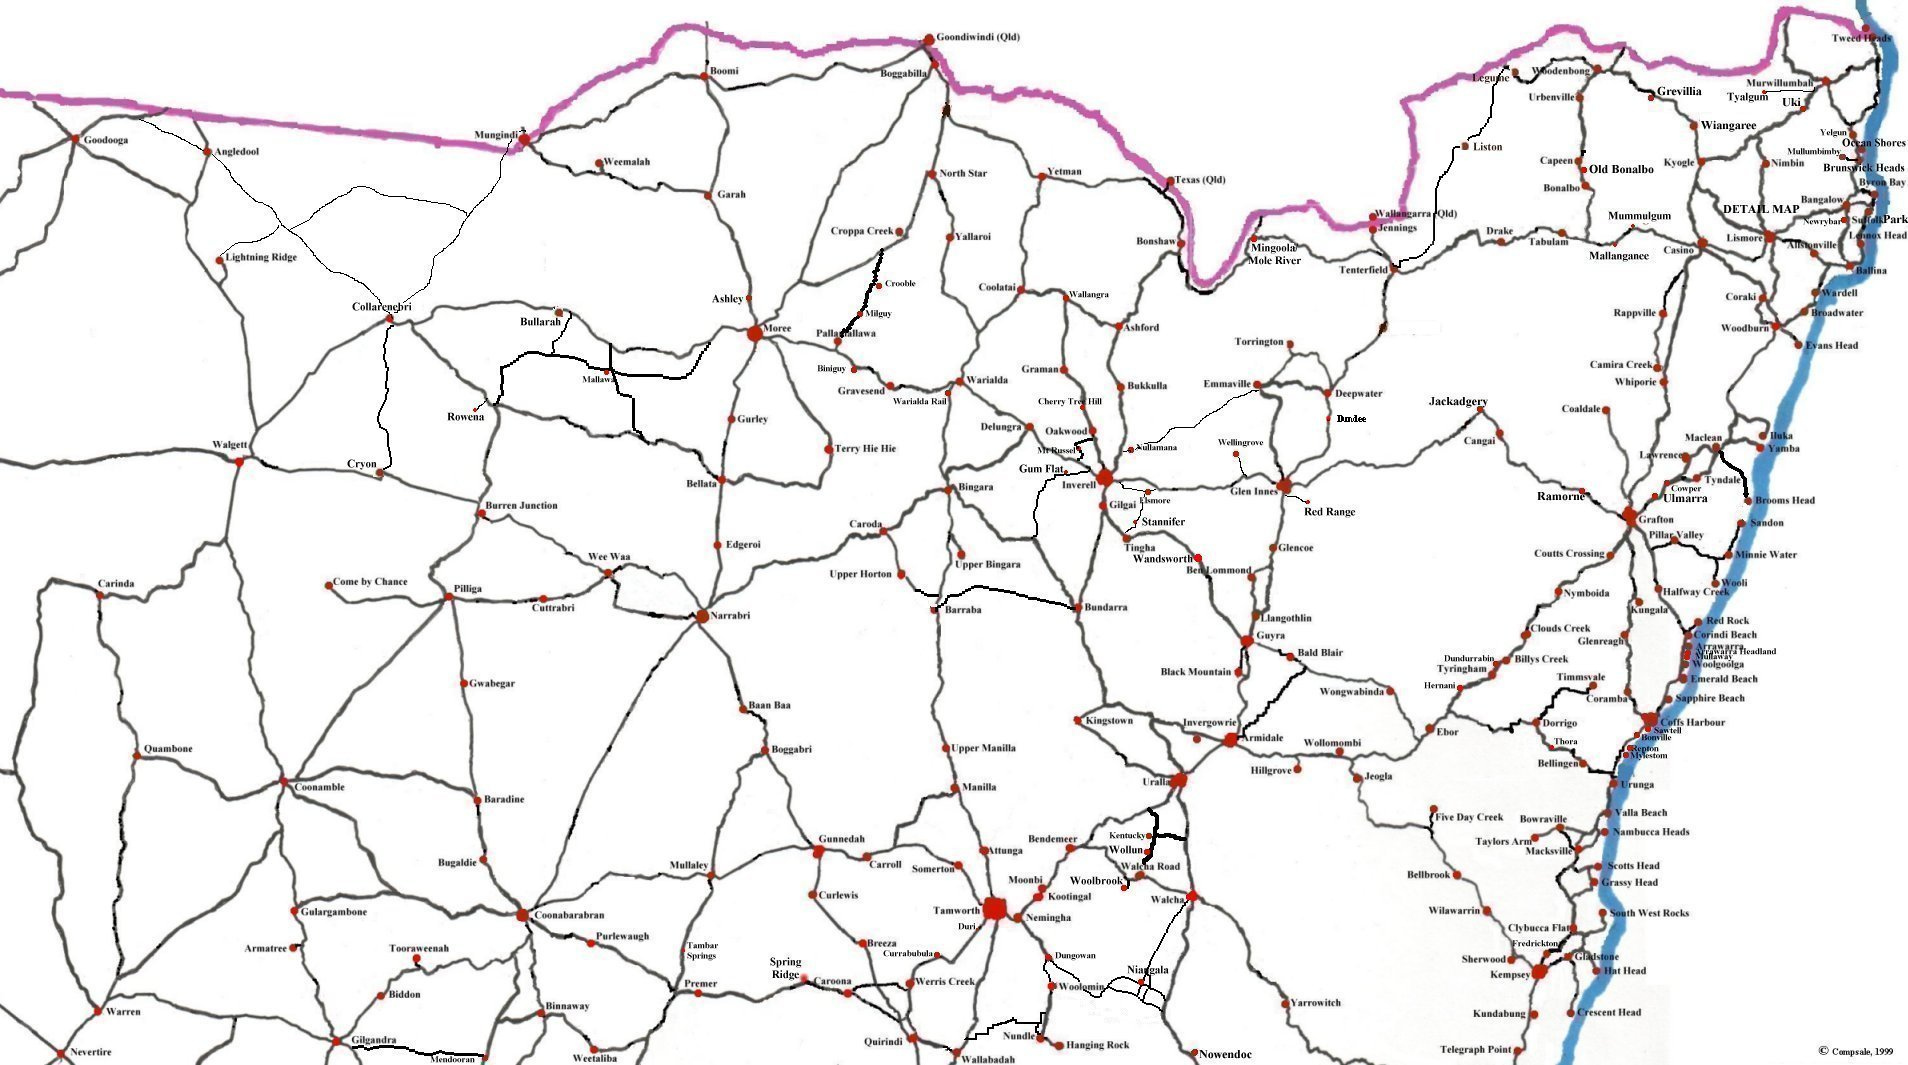 DETAILED MAP OF NORTHERN NSW